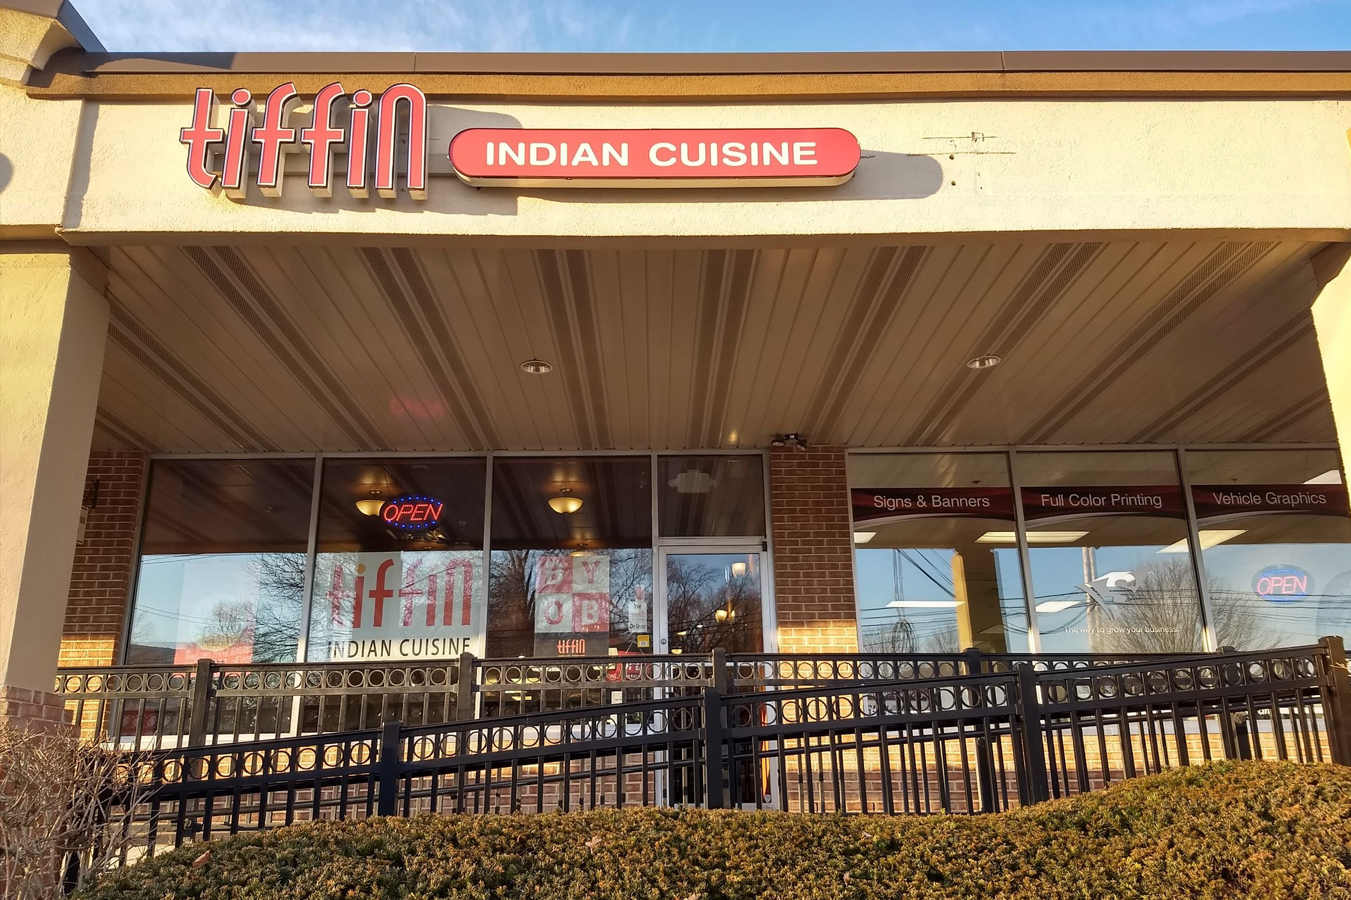 Indian Food 19406 Montgomery County King of Prussia Broomall Bridgeport Tiffin Restaurant Munish Narula’s own Recipe  Dhaba Chicken Make Indian at home